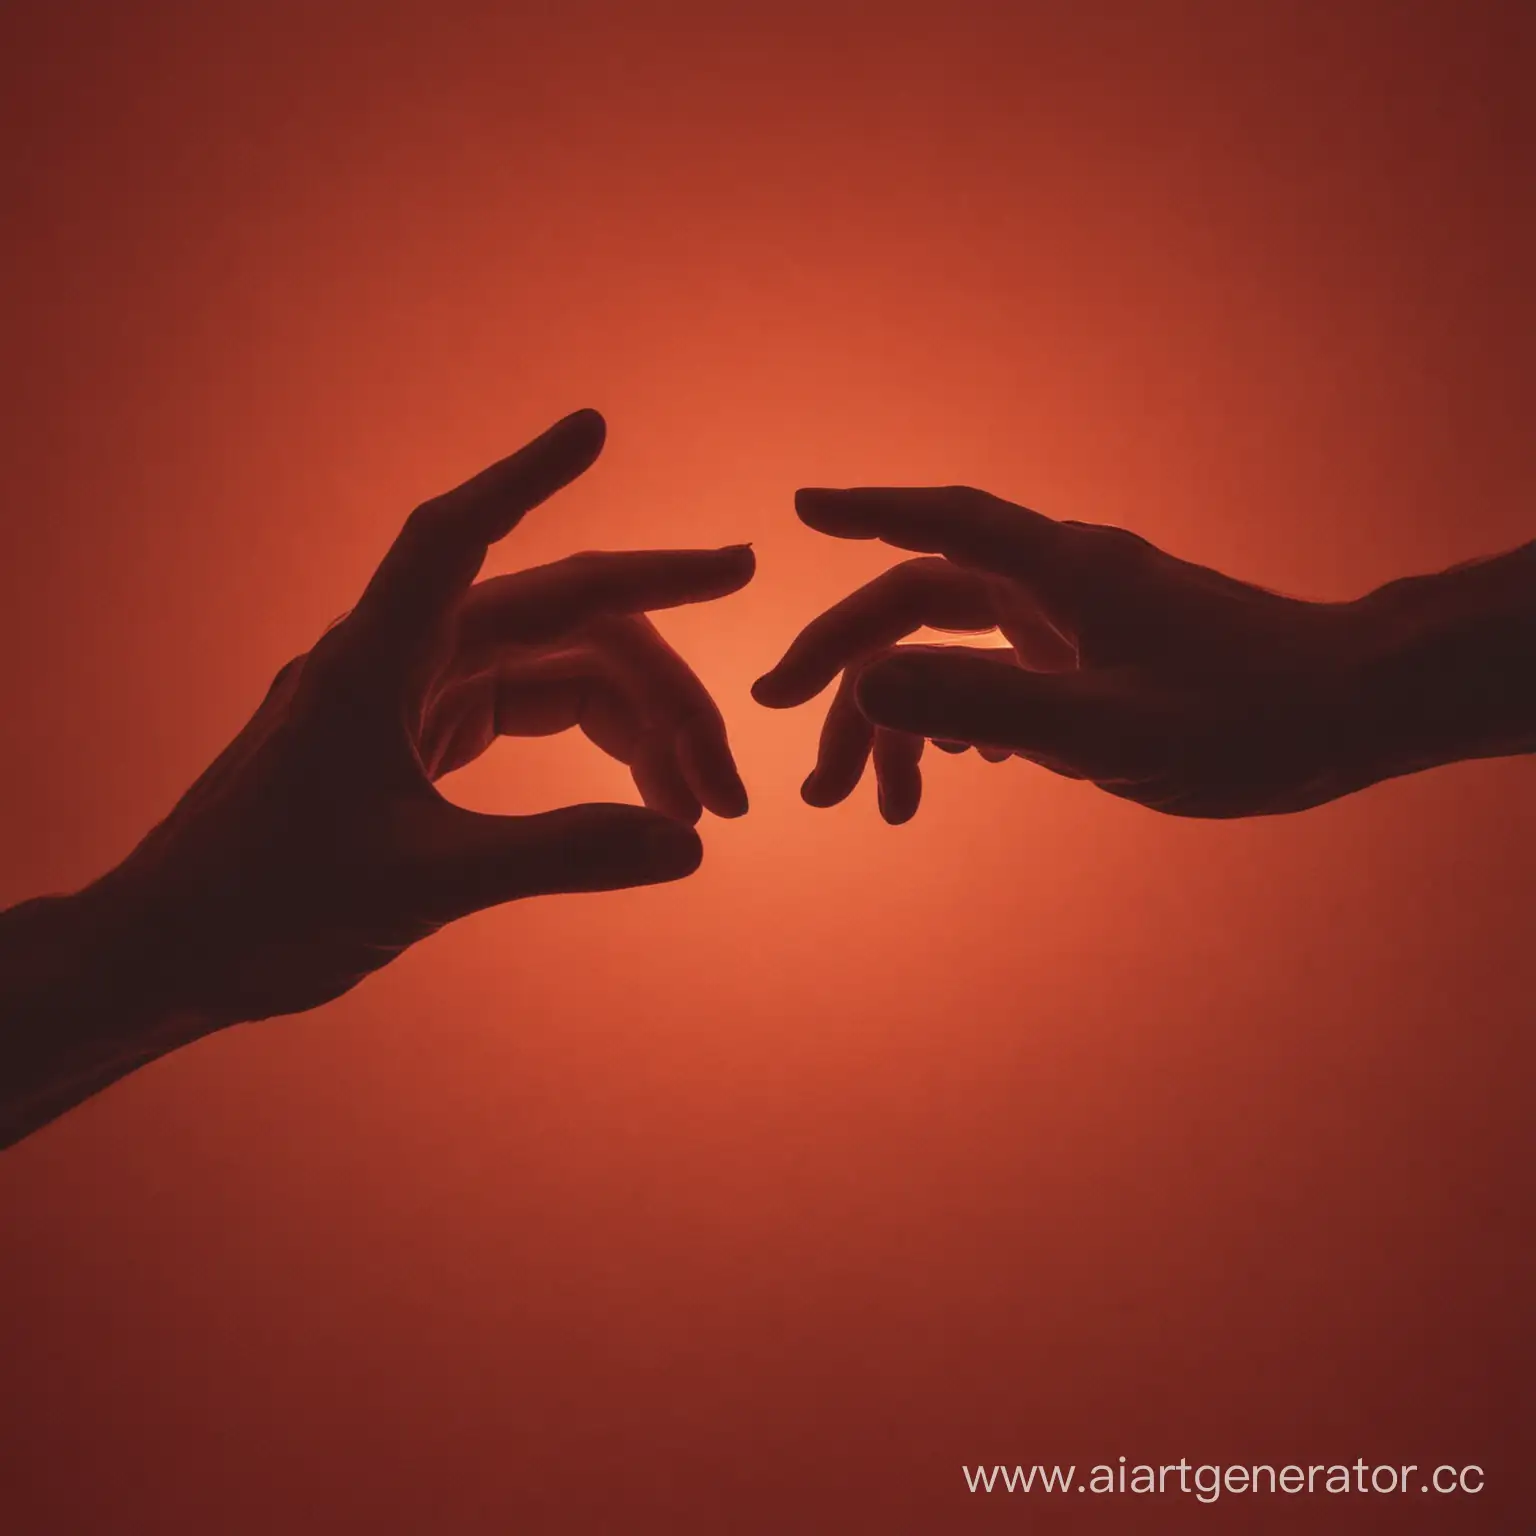 Intangible-Connection-Reaching-Hands-in-RedOrange-Light